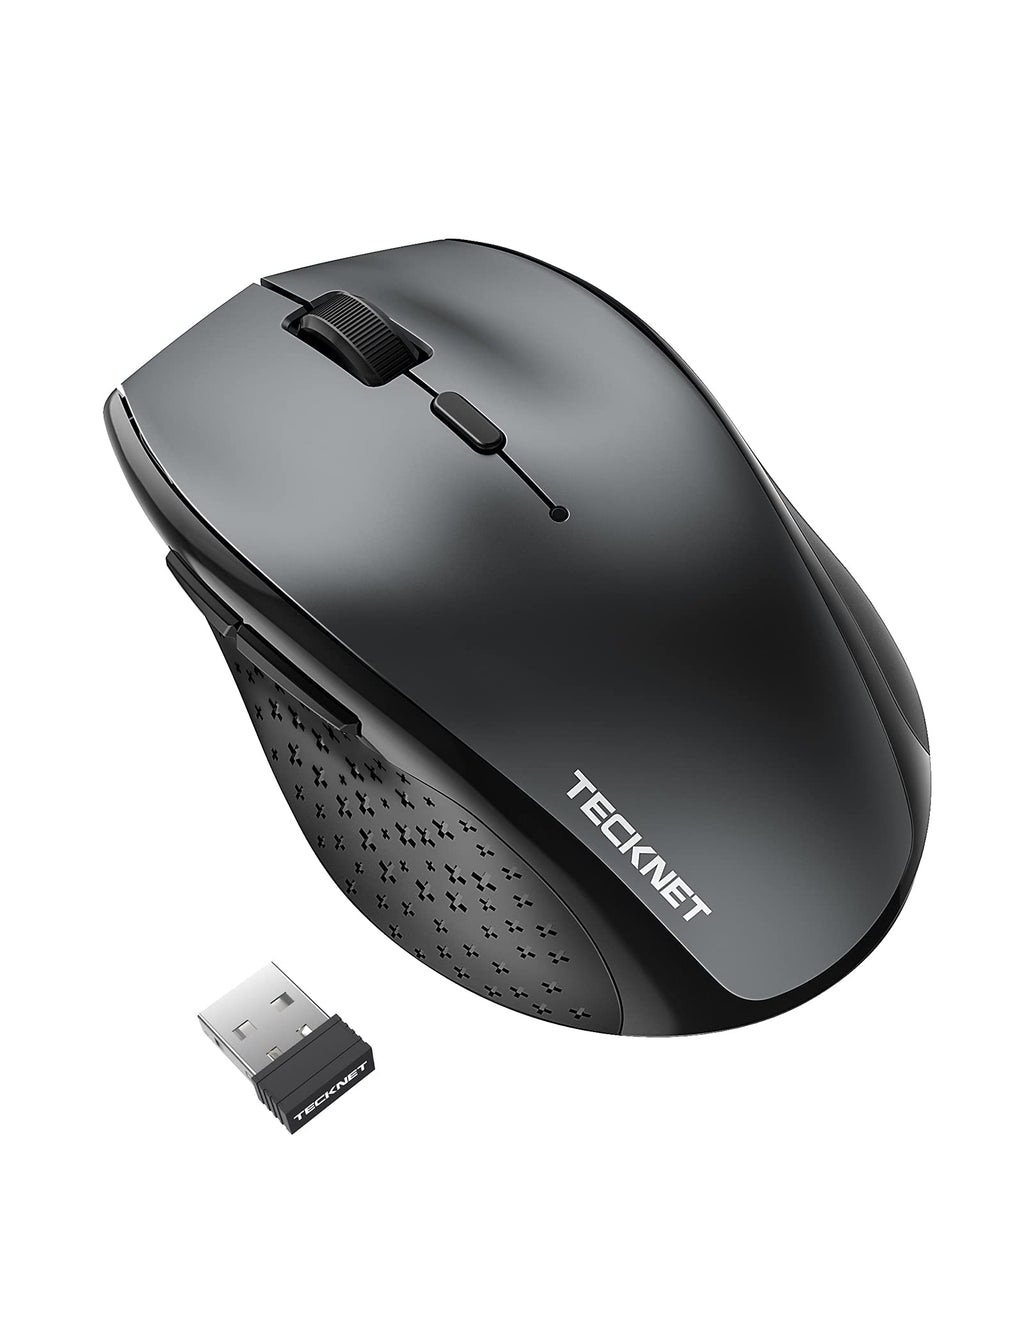  [AUSTRALIA] - TECKNET Bluetooth Mouse, Wireless Mouse Tri-Mode (BT 5.0/3.0+2.4Ghz) with Nano Receiver, Computer Mouse with 6 Adjustable DPI Levels and 6 Buttons for PC, Laptop, Windows Computer, MacBook